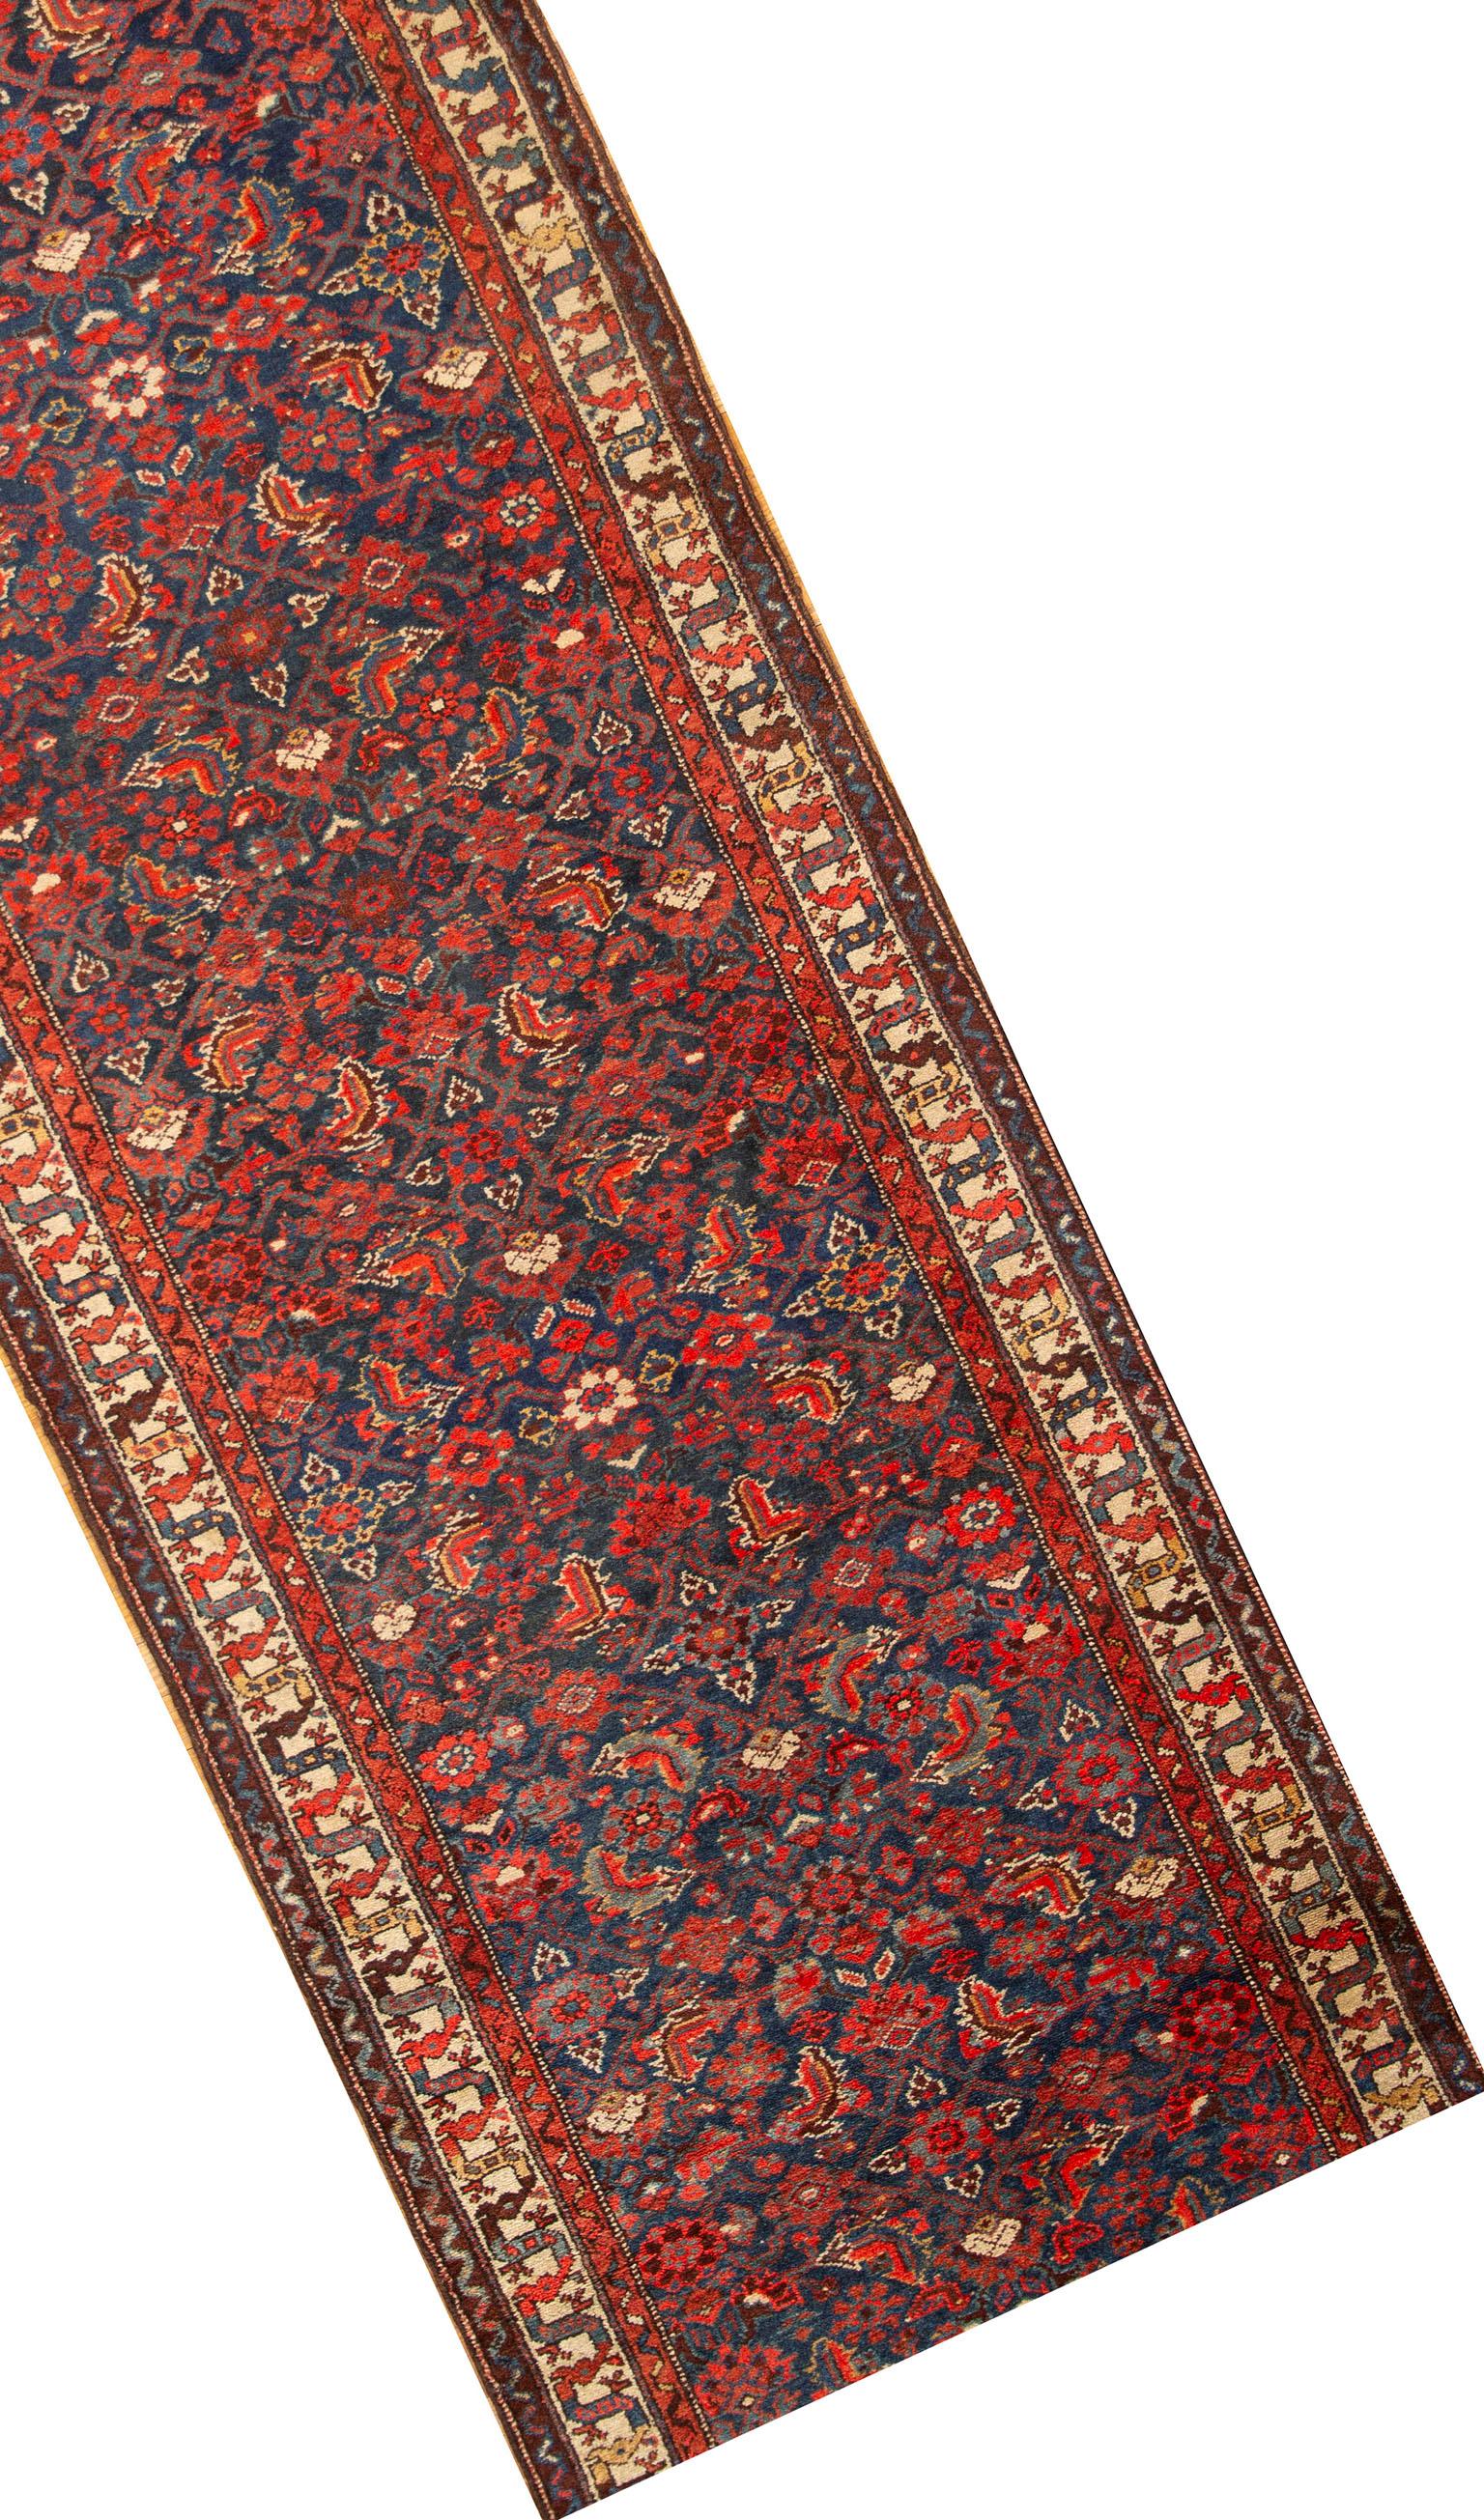 Persian Hamadan runner, circa 1920. Size: 3'4 x 13'4. This lovely, circa 1920s Hamadan Persian runner. Has a profusion of floral motifs on a deep blue ground. Surrounded by an ivory border and two smaller borders this is a joyful runner.